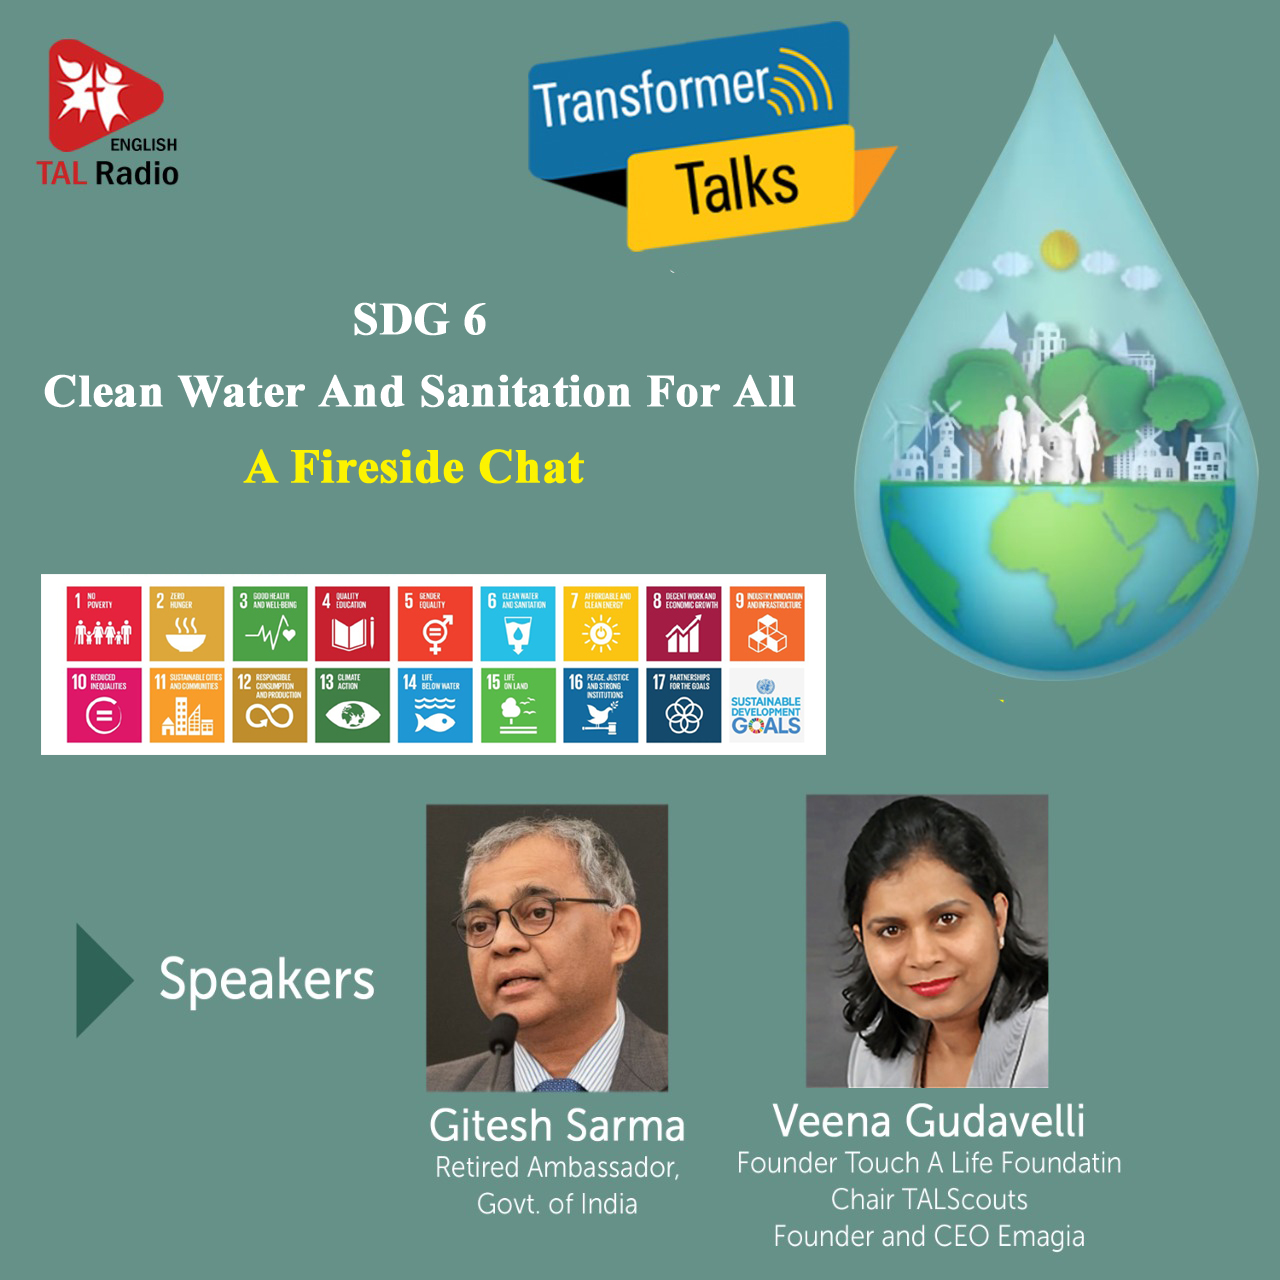 Clean Water And Sanitation For All - A Fireside Chat